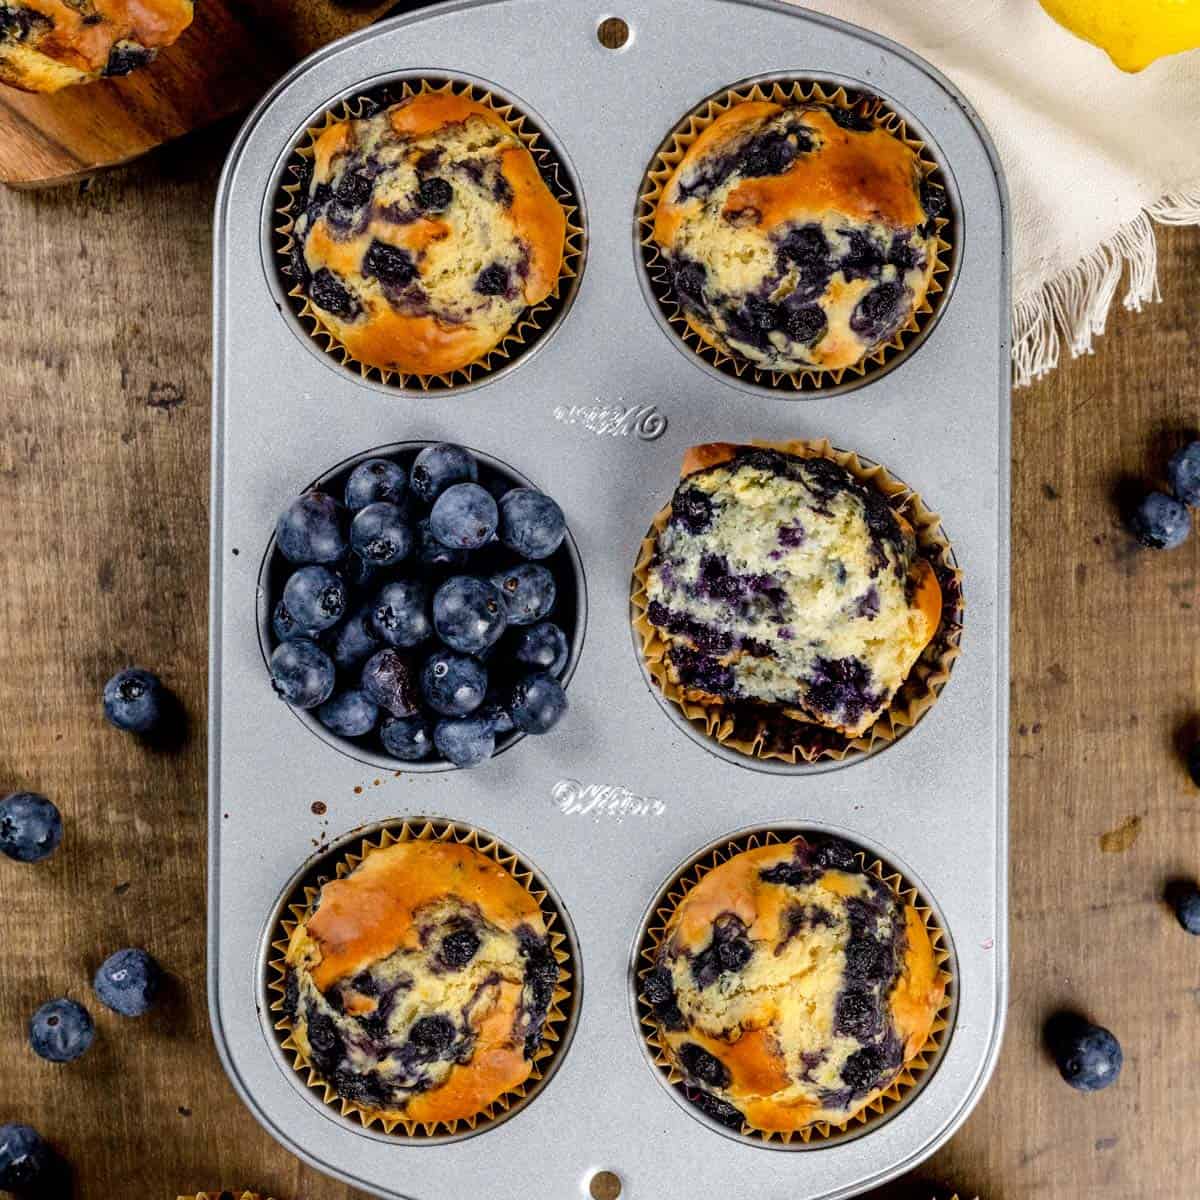 Protein blueberry muffins in a silver muffin tray on a wood tabletop. More muffins and fresh blueberries are surrounding the tray.